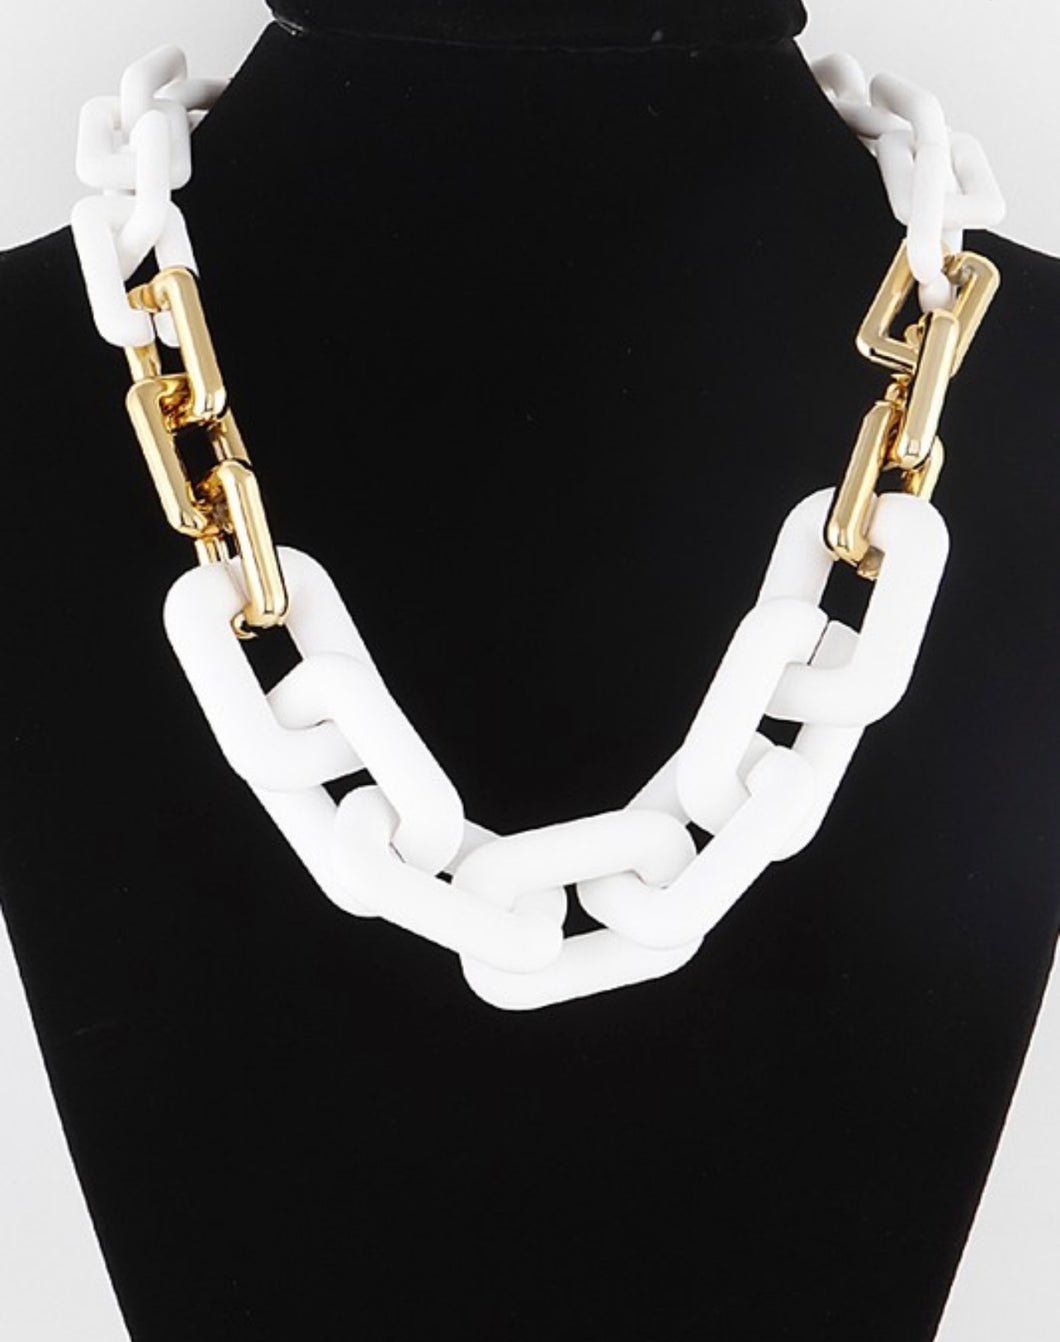 WHITE BULKY LINK CHAIN NECKLACE